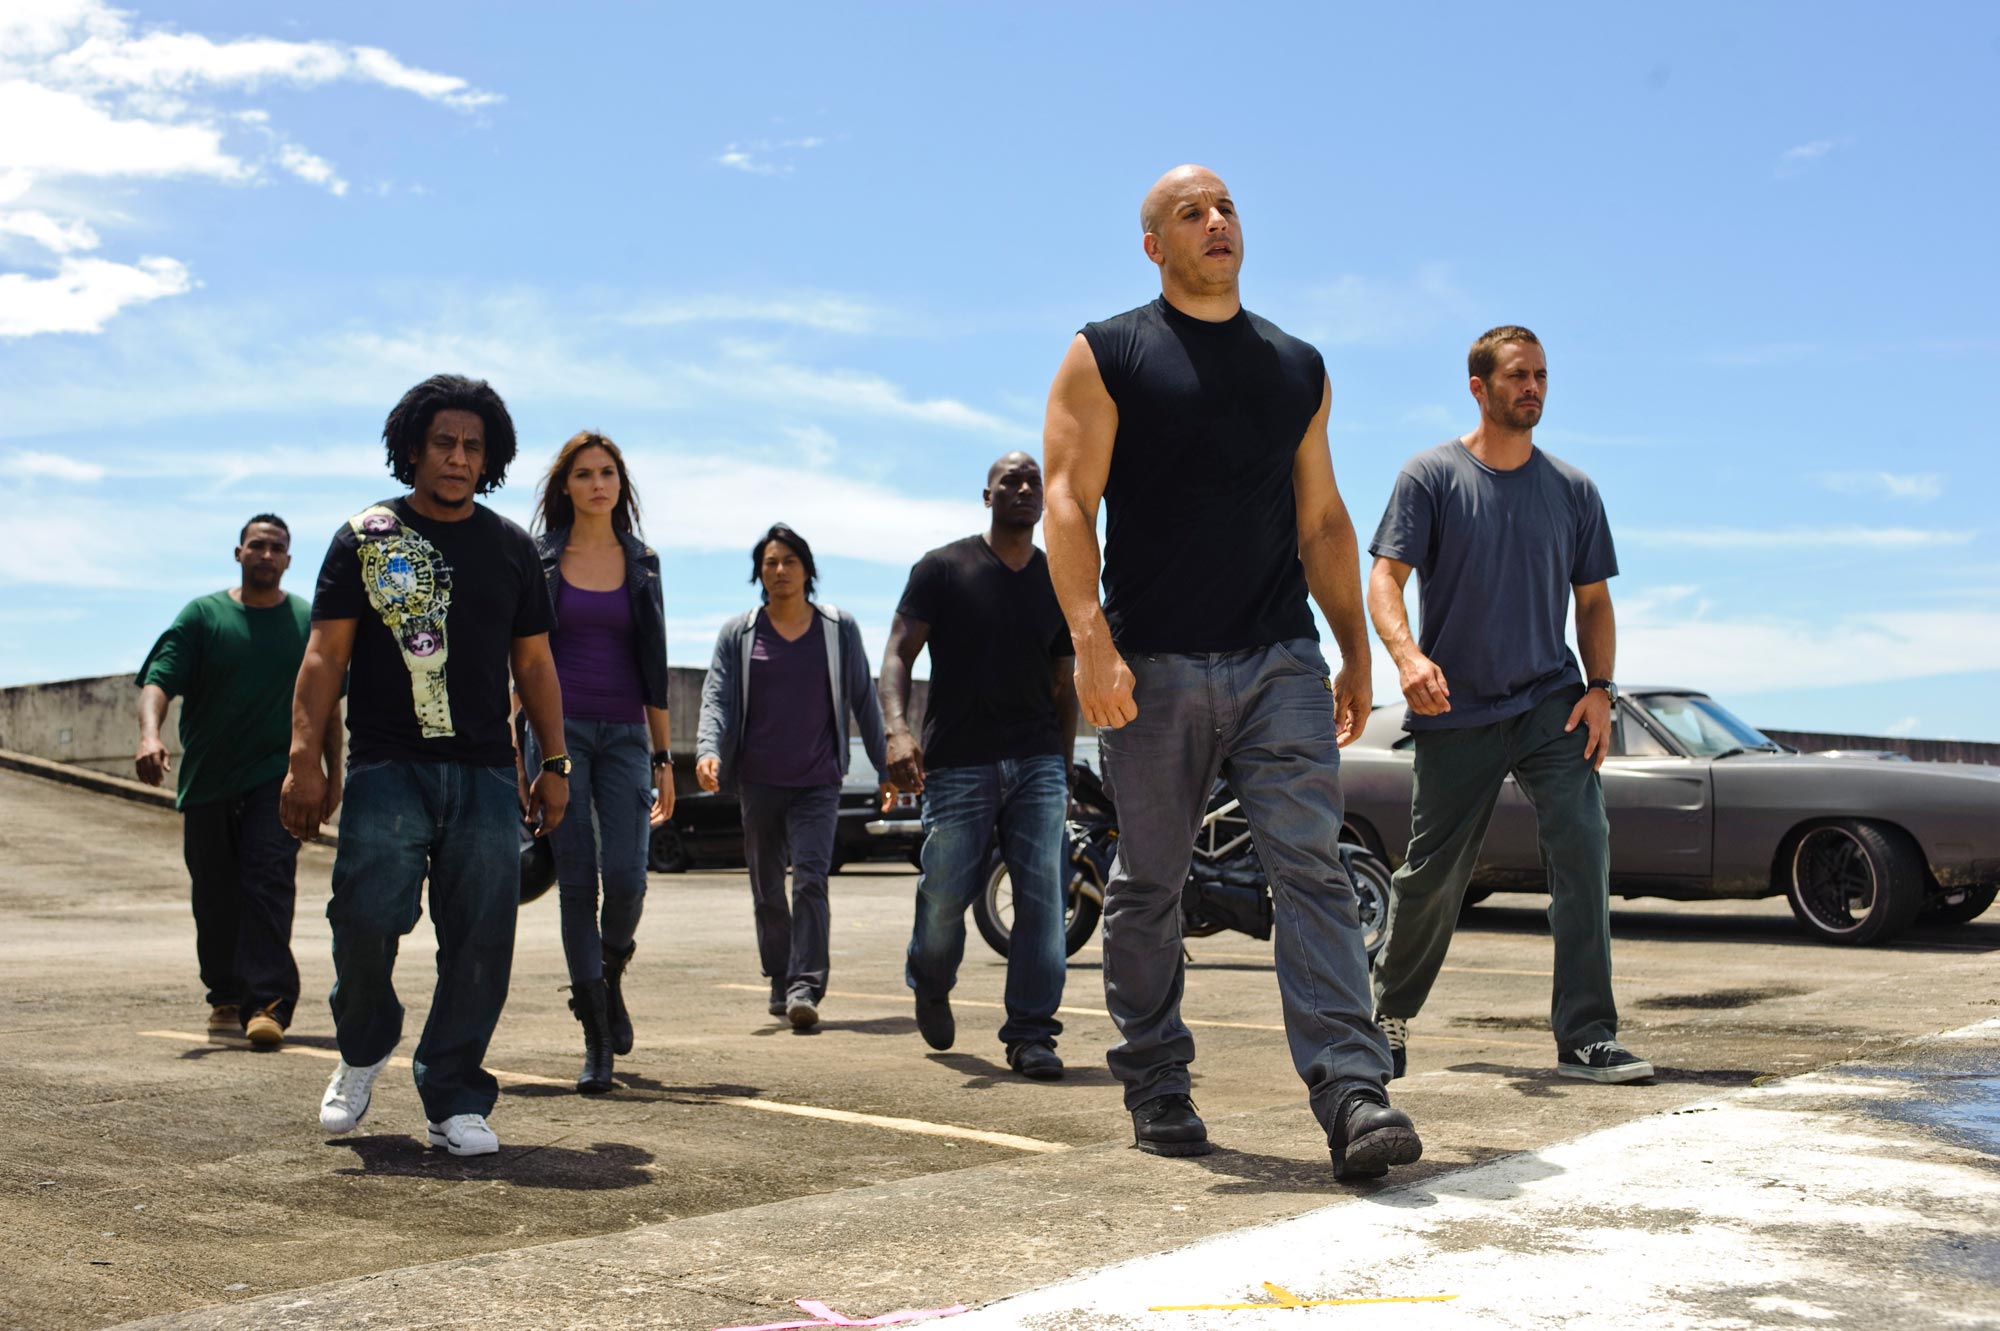 New Hi Res Fast Five Images and Wallpapers   FilmoFilia